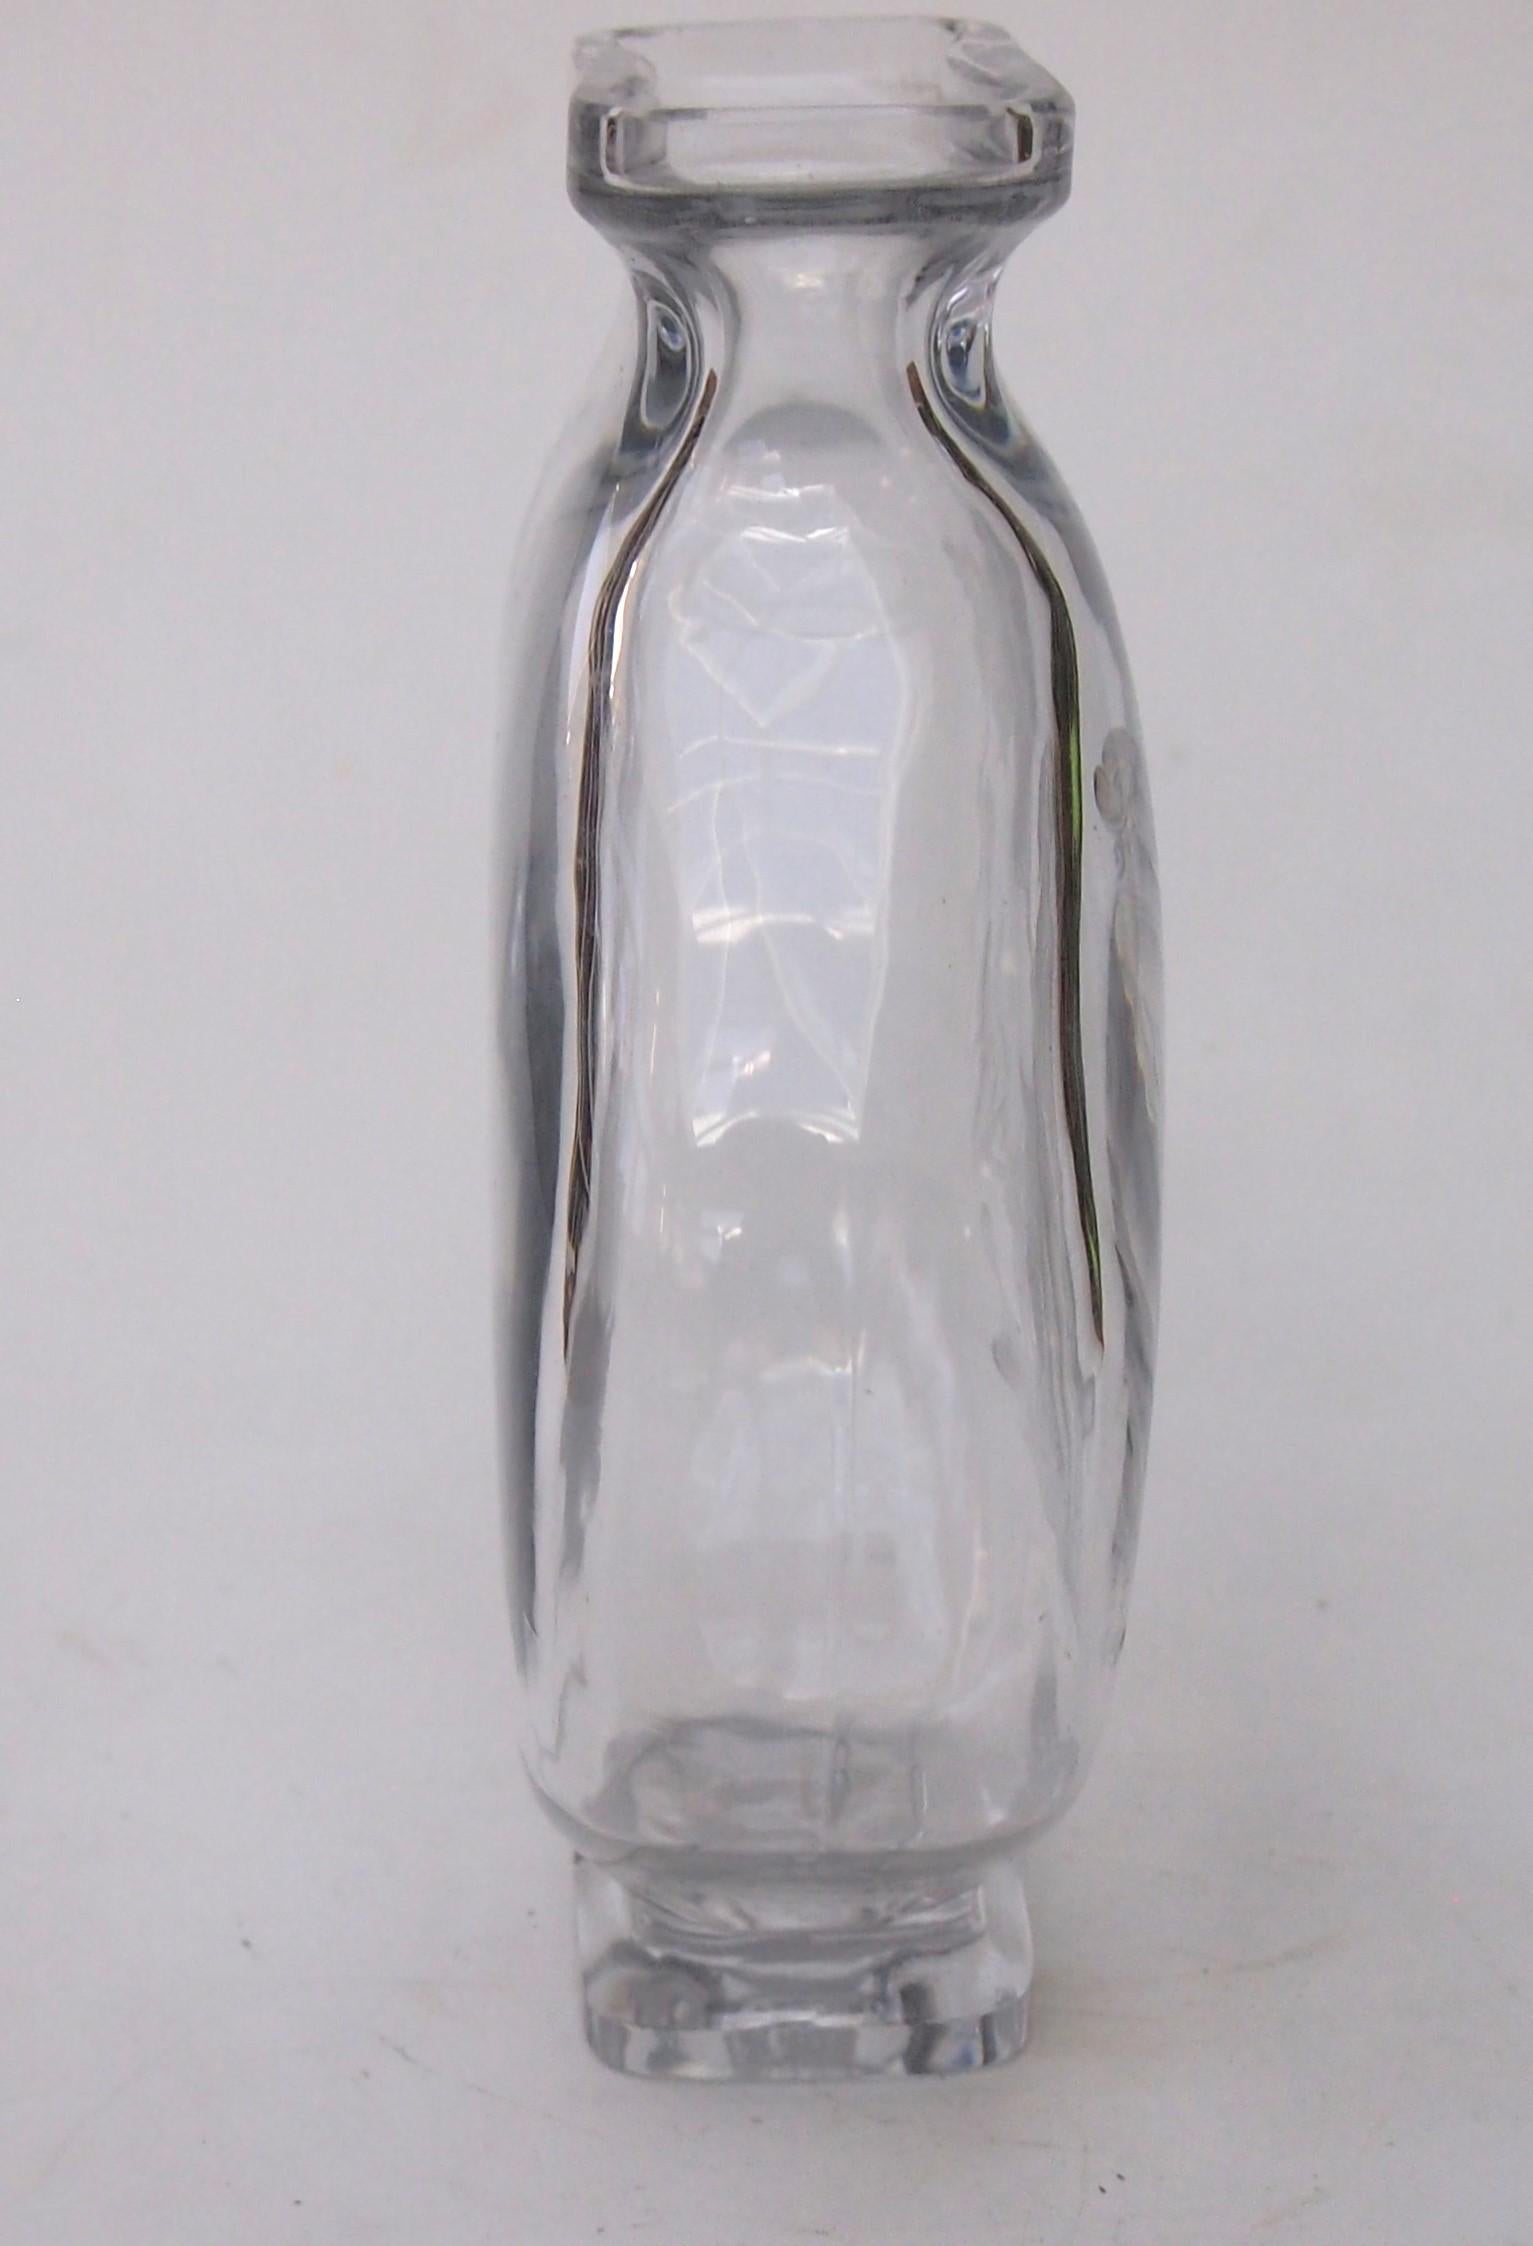 Baccarat Aesthetic movement intaglio cut glass vase c 1880 In Good Condition For Sale In Worcester Park, GB